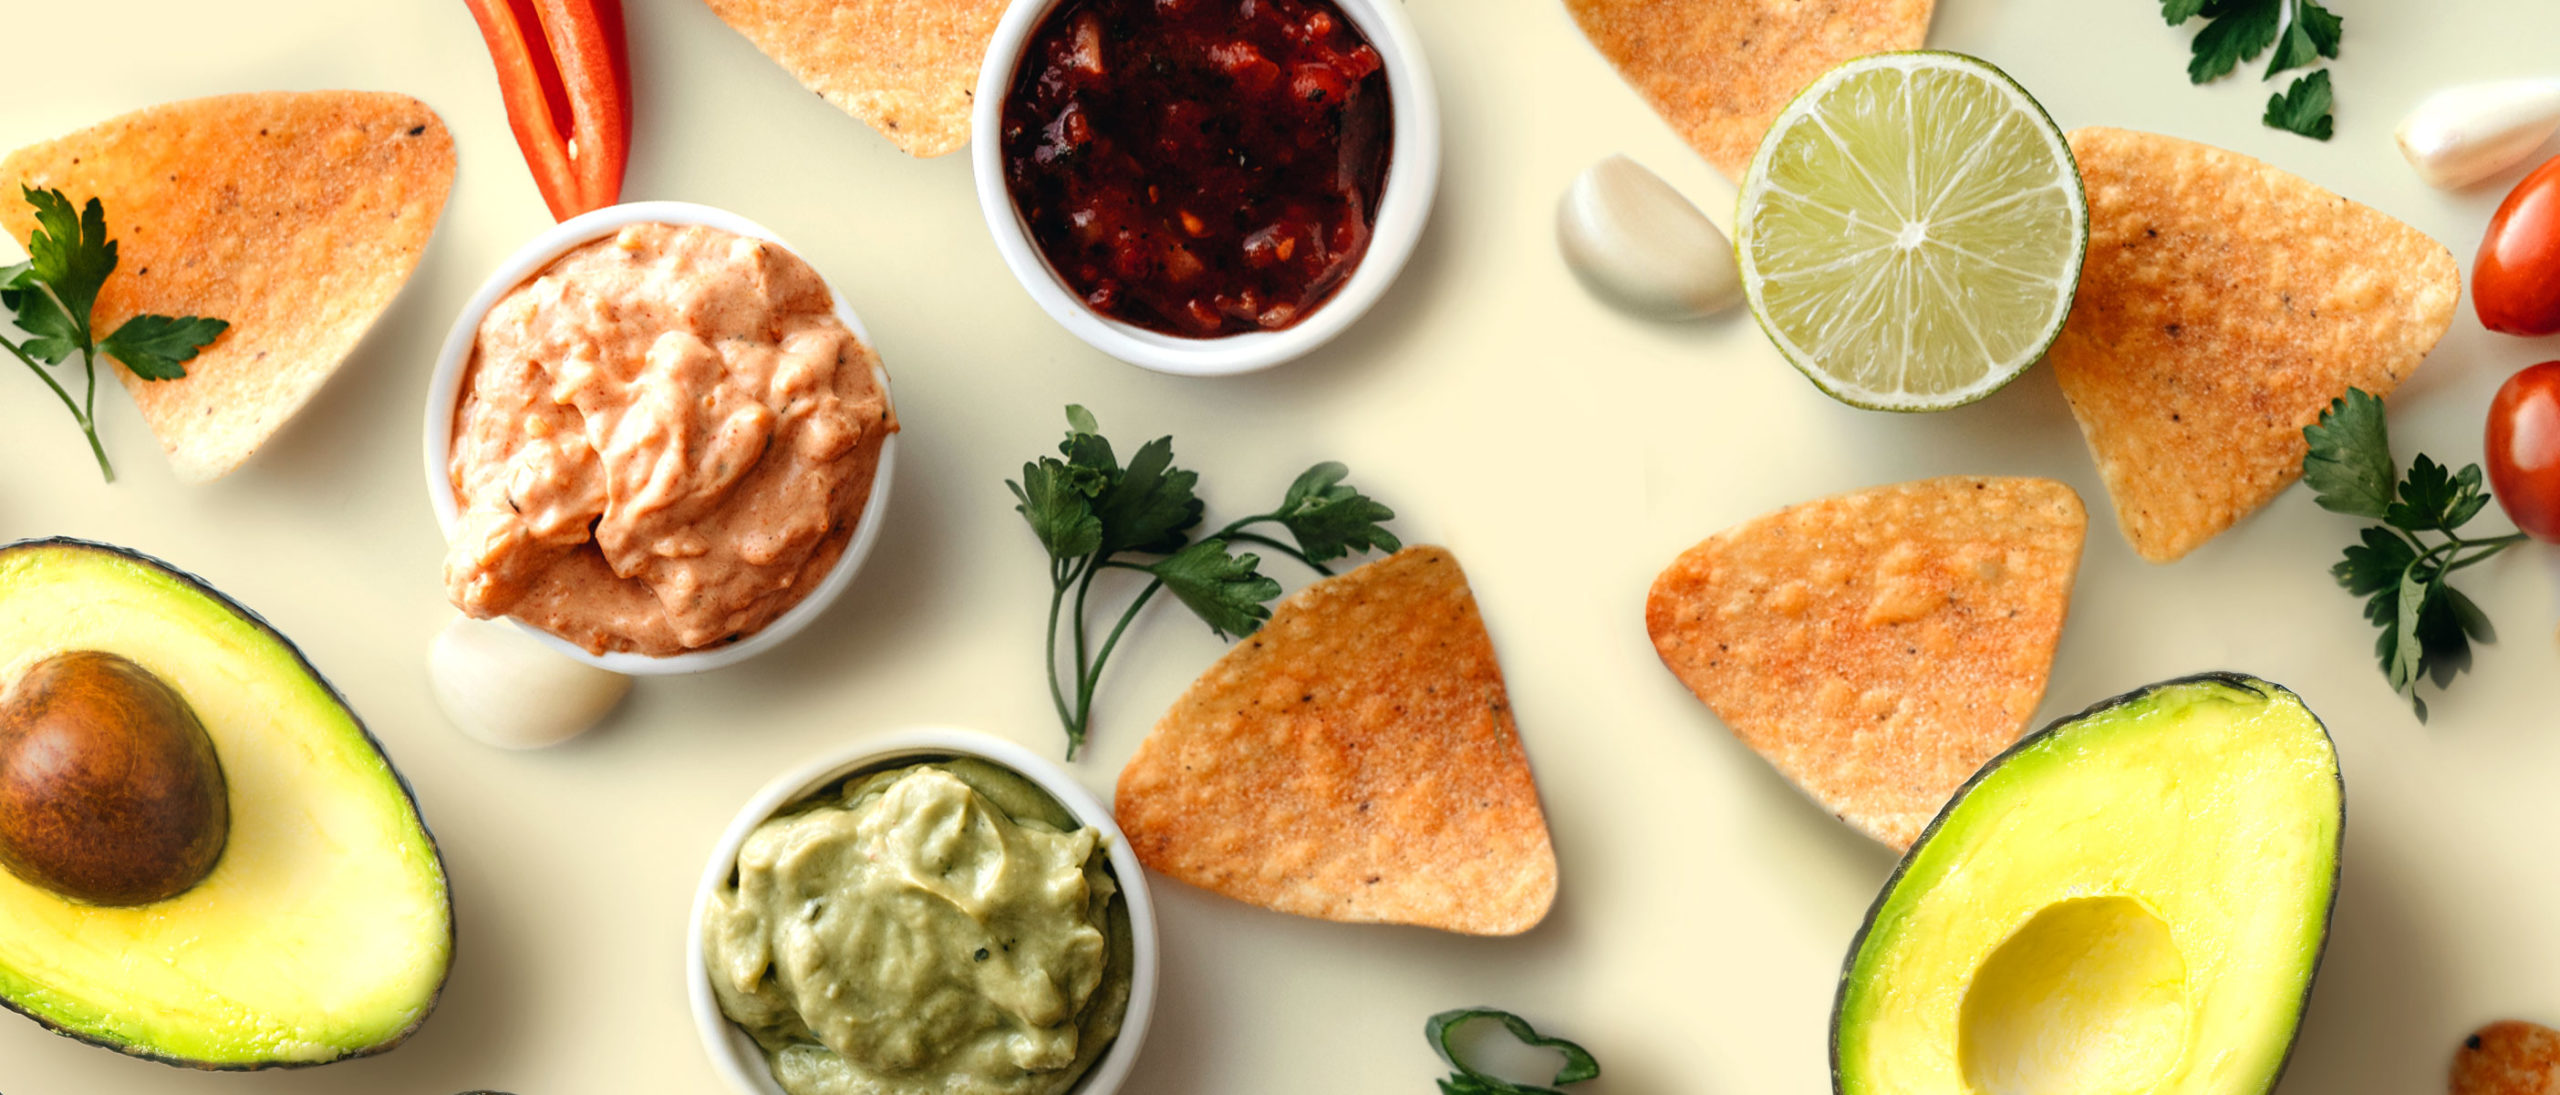 Avoid Overspending on Avocados and Try These 5 New Dip Recipes